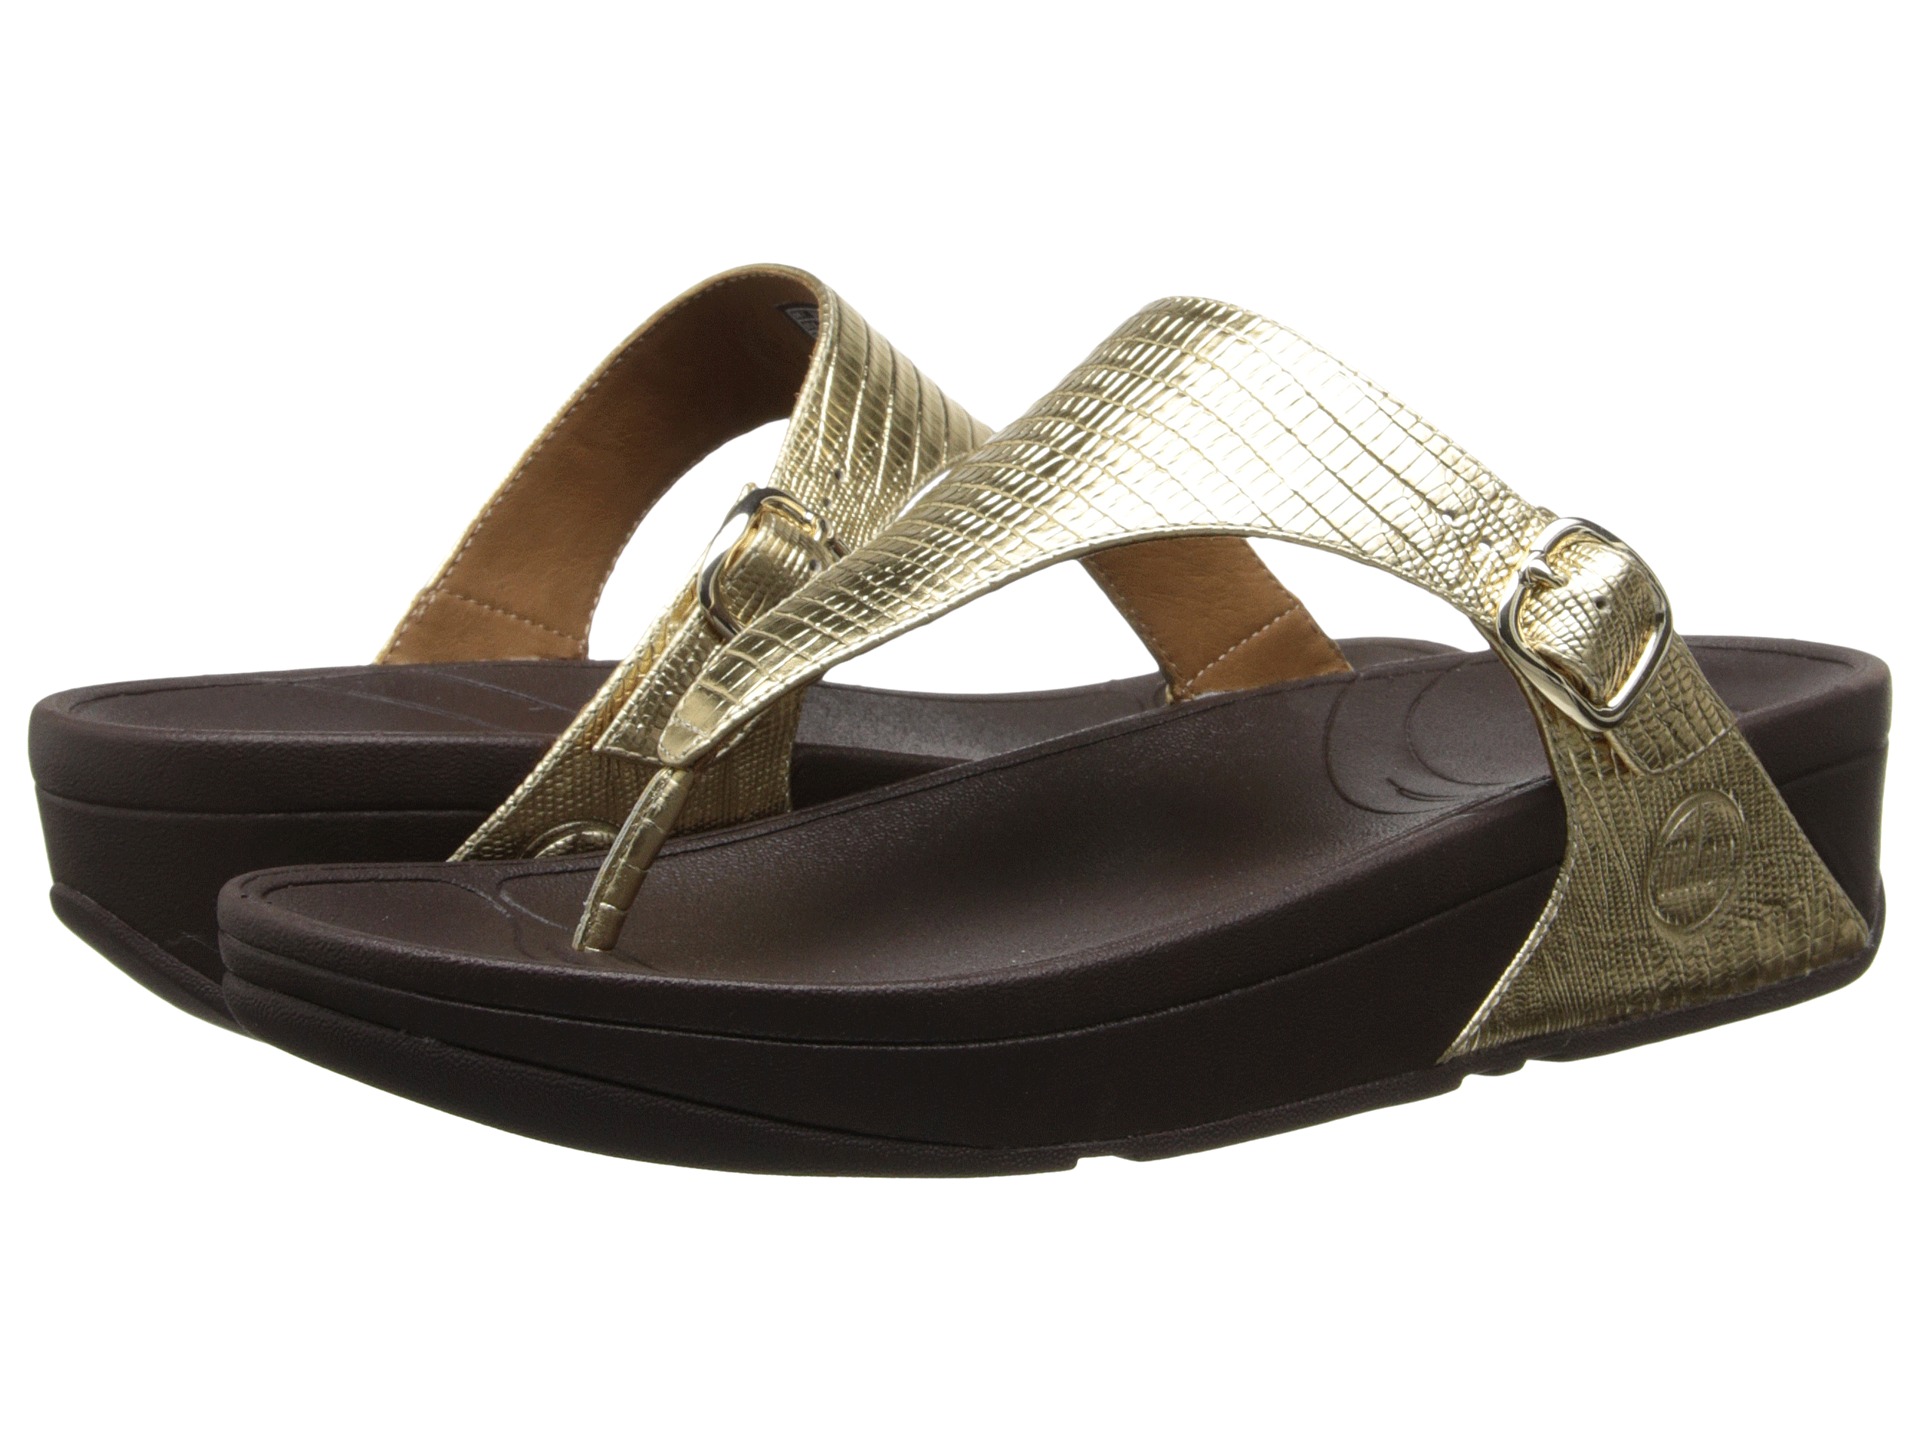 FitFlop The Skinnyâ„¢ Gold - Zappos Free Shipping BOTH Ways